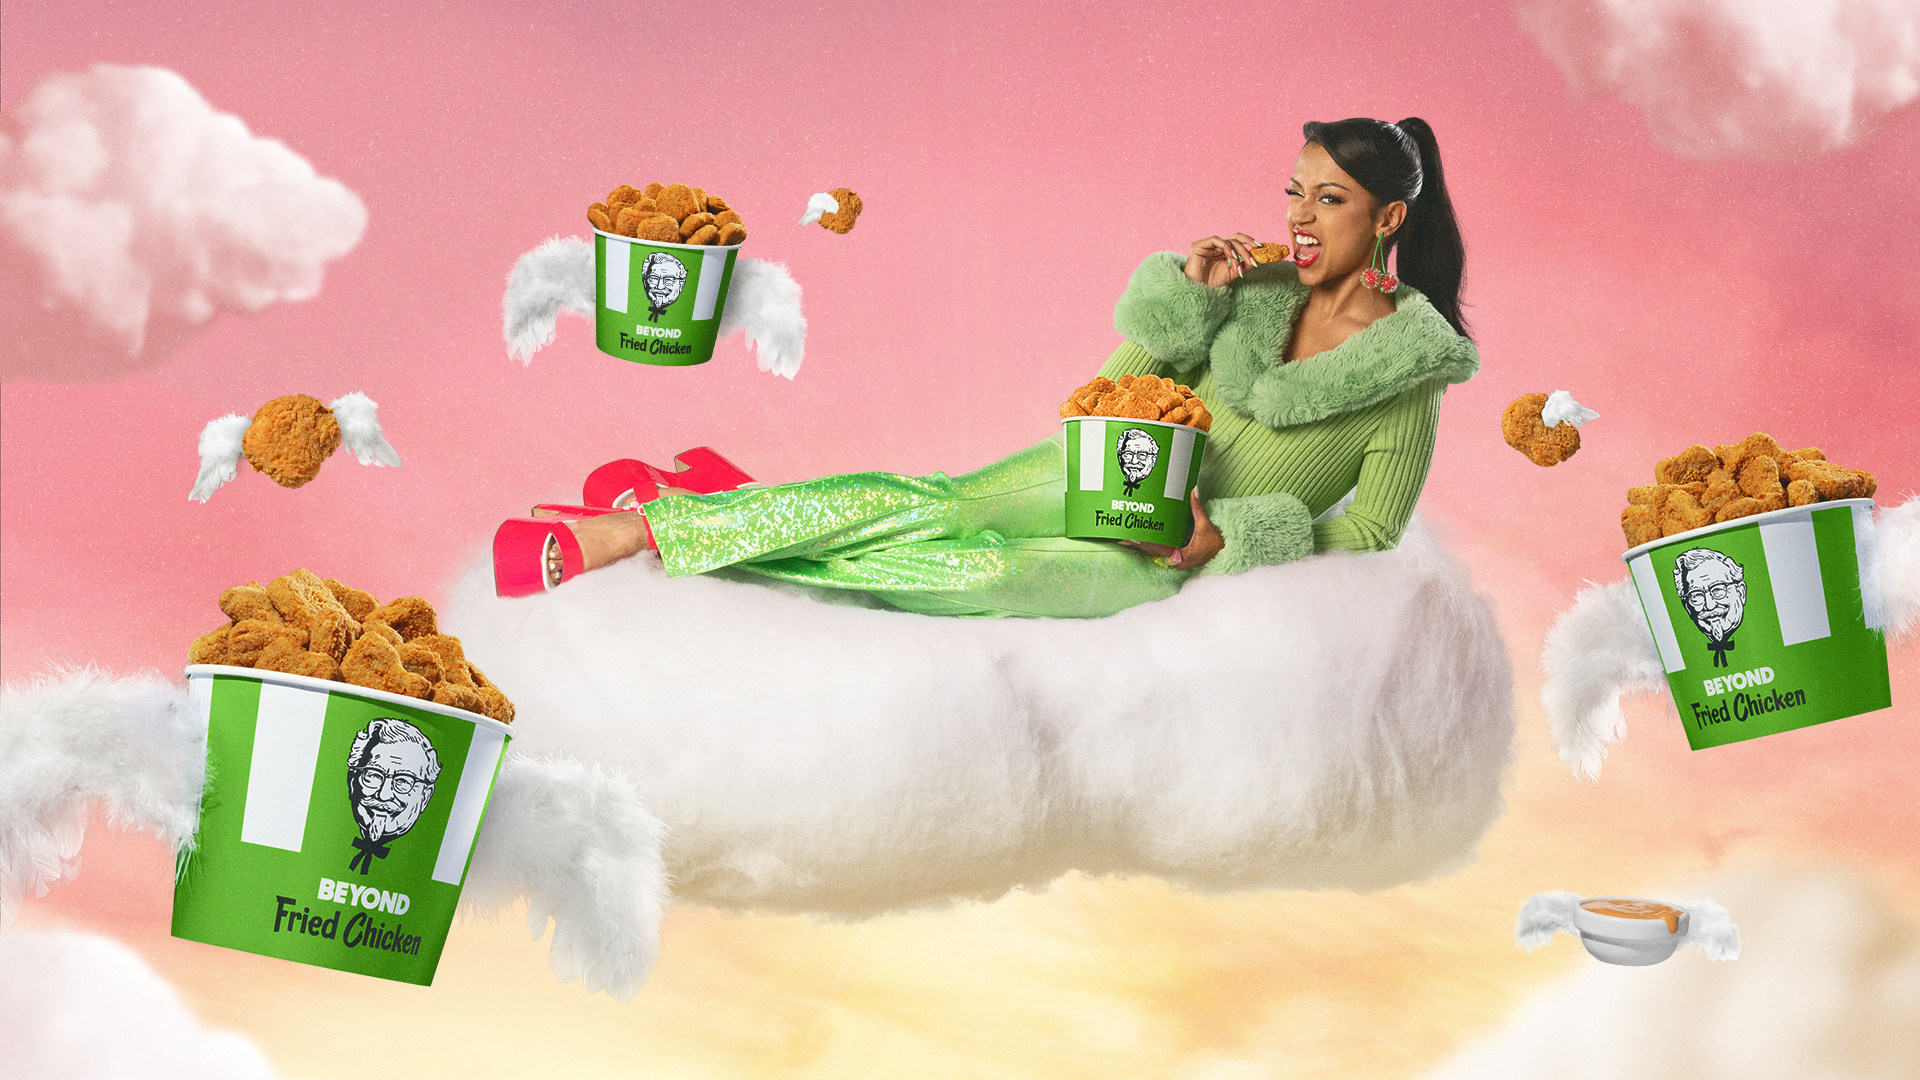 KFC and Beyond Meat are rolling out the “Magic Chicken Carpet” for actress, producer, and creator Liza Koshy, to celebrate the ongoing partnership and nationwide debut of Beyond Fried Chicken.